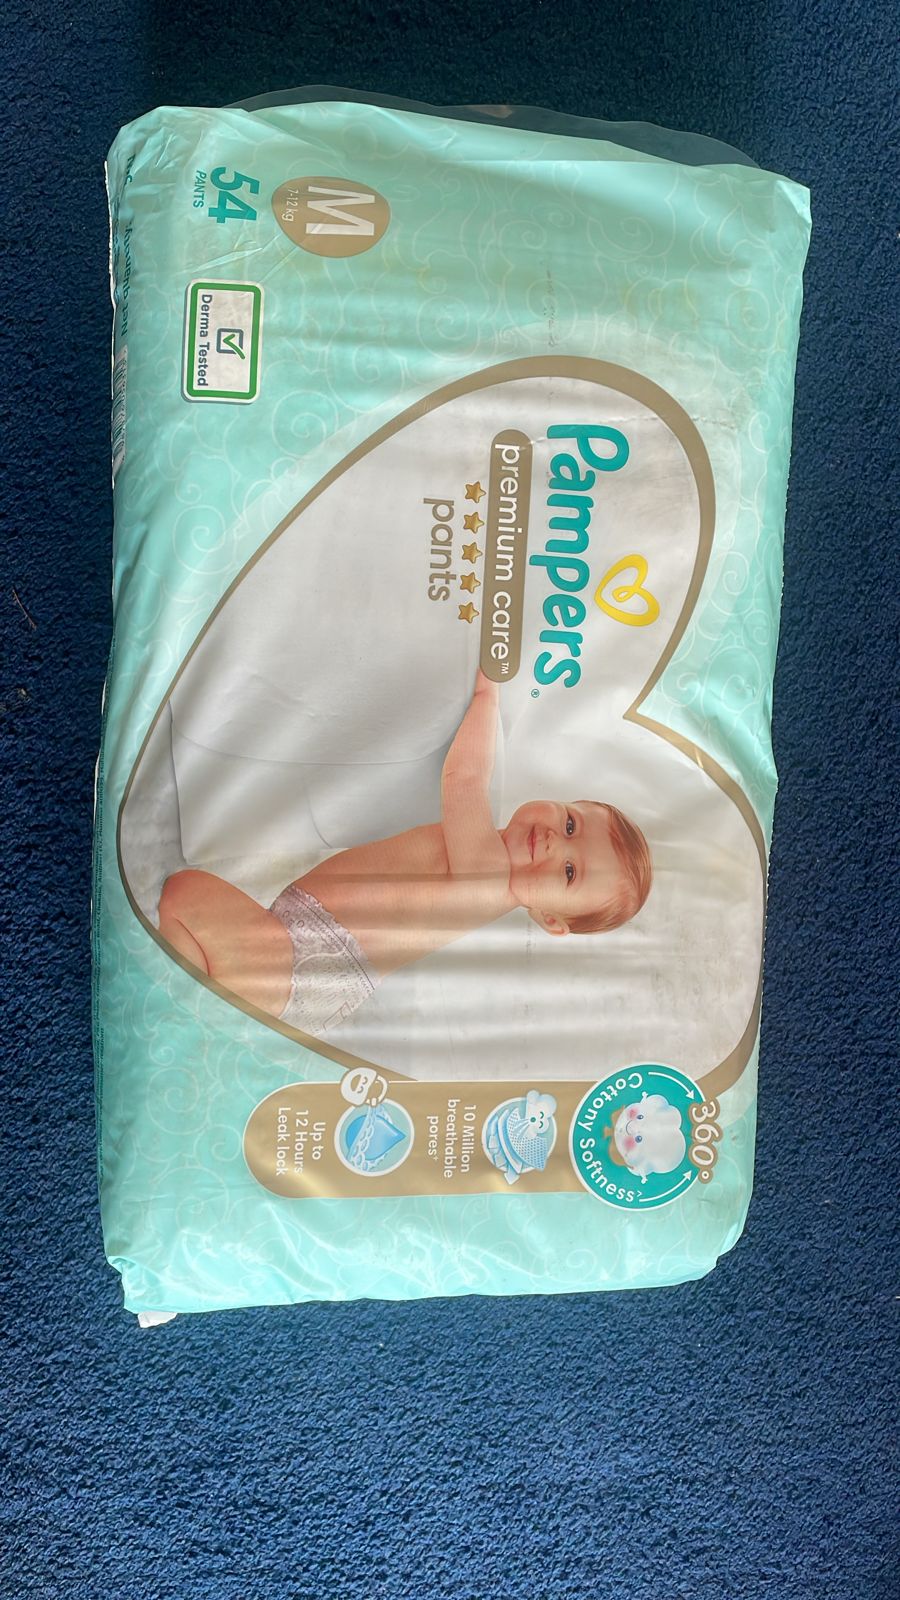 Buy Pampers Premium Care Pants, Medium size baby diapers (MD), 16 Count &  Pampers Active Baby Taped Diapers, Small size diapers, (S) 22 count, taped  style custom fit & Pampers Baby Aloe